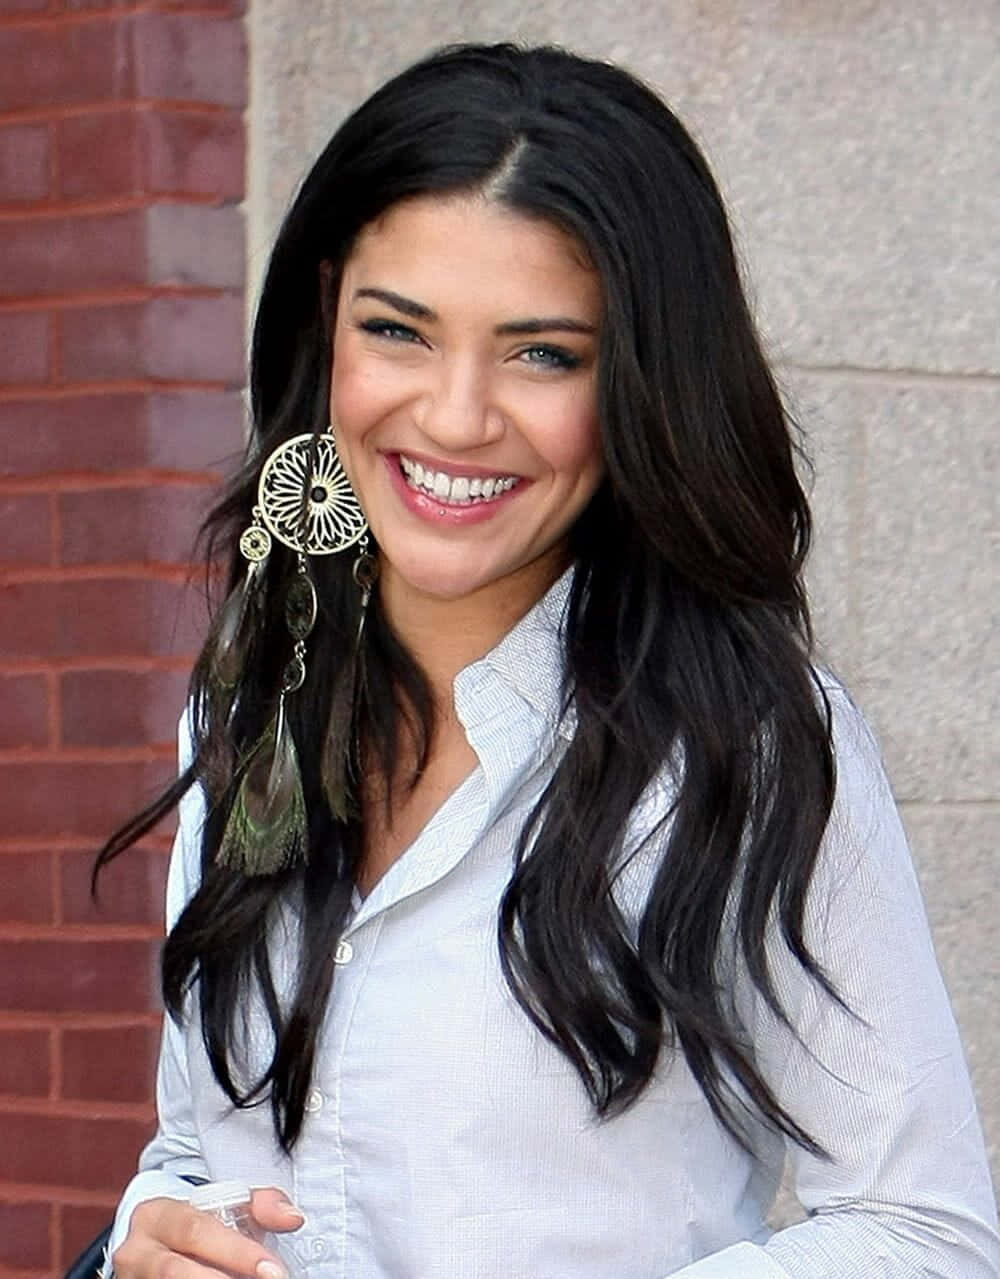 Jessica Szohr Posing Gracefully In A Photoshoot Background